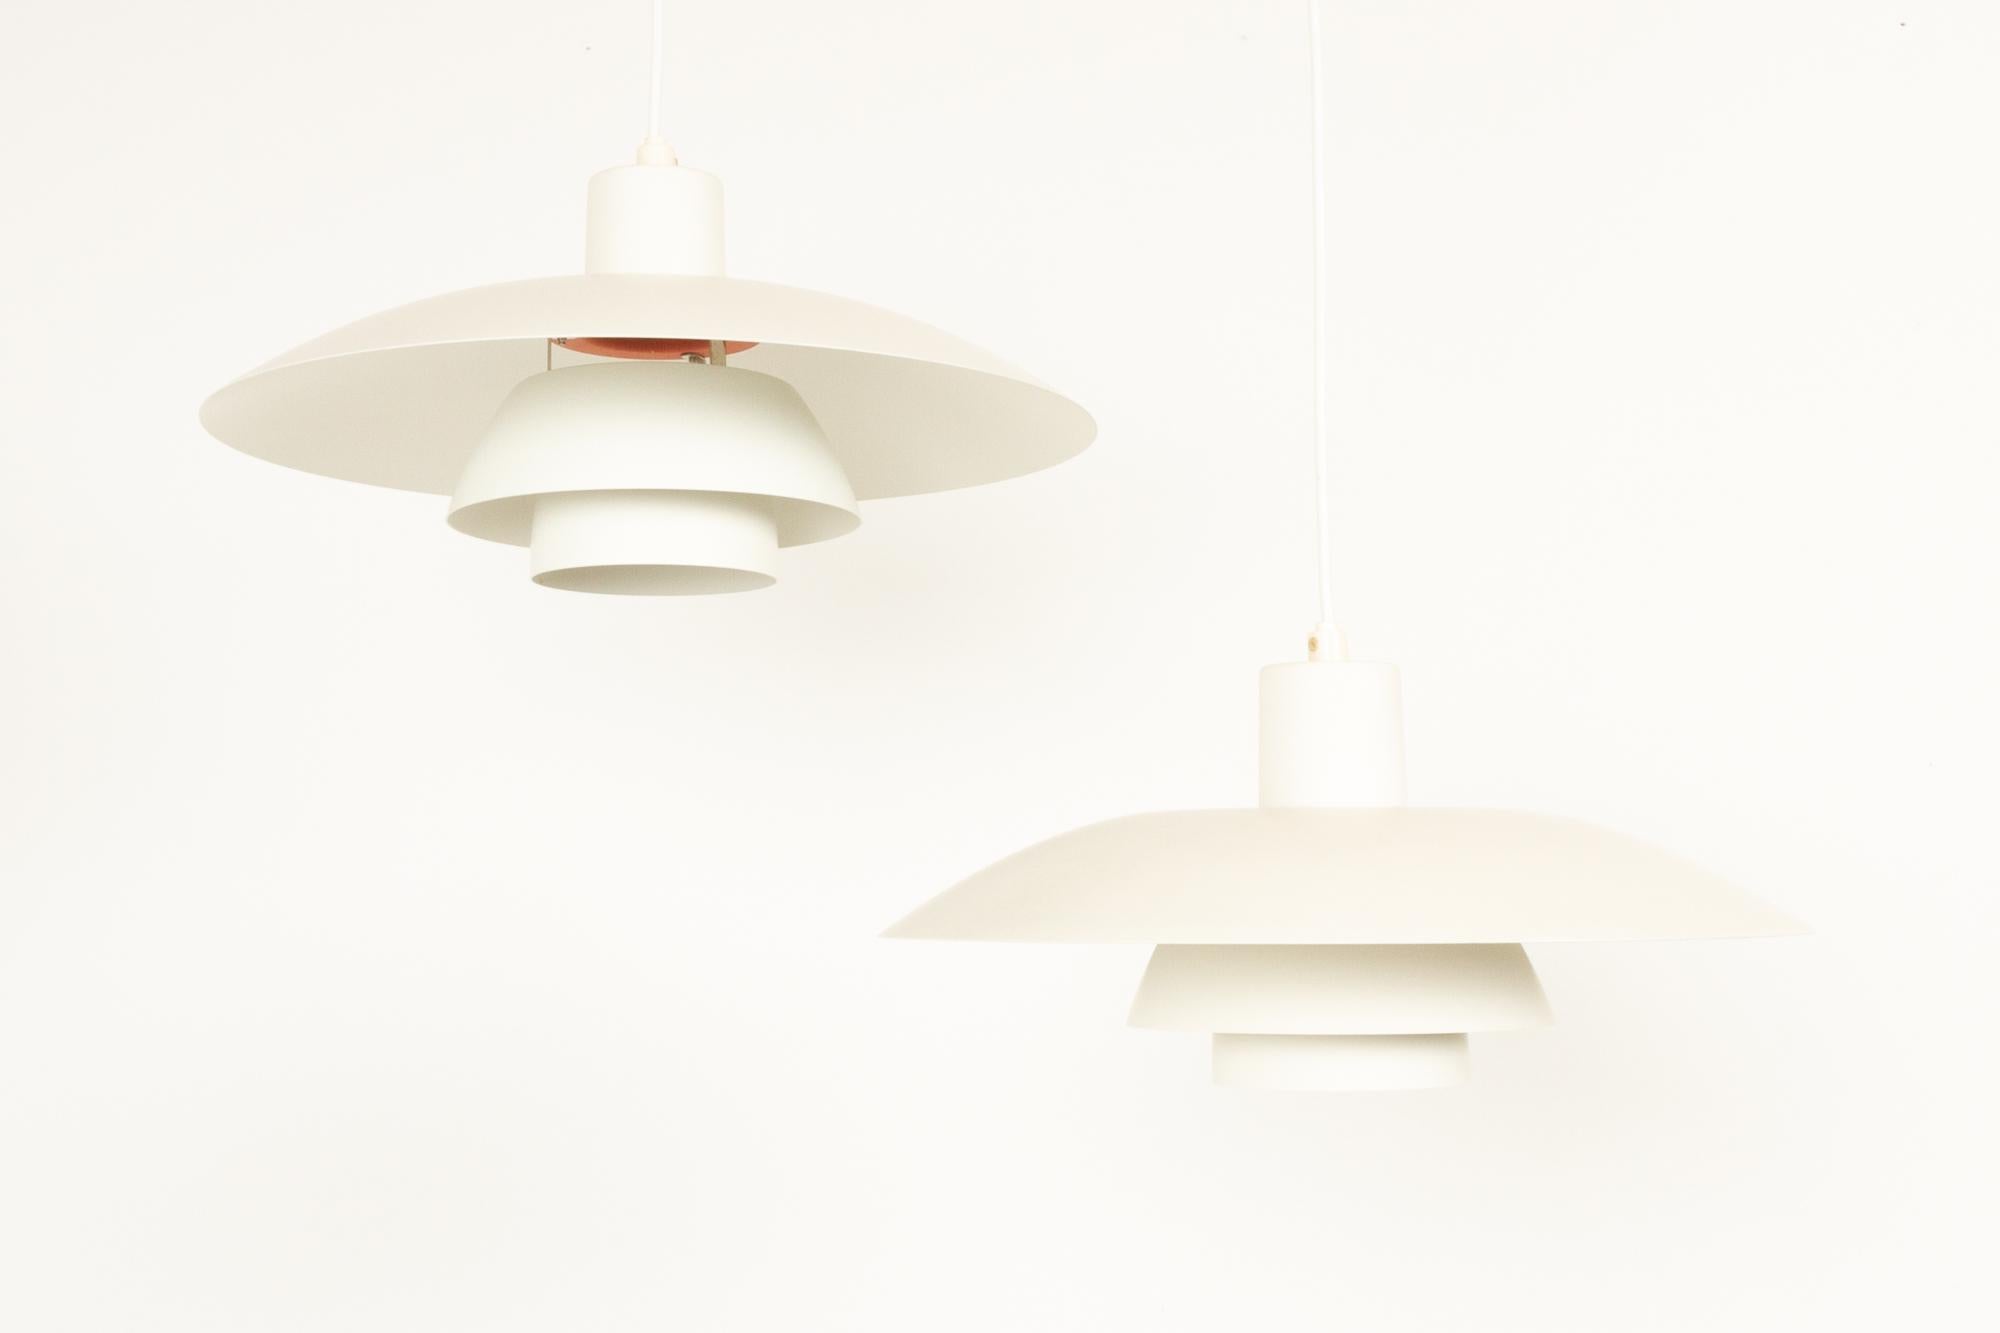 Vintage PH 4/3 pendants by Poul Henningsen for Louis Poulsen 1970s, set of 2

Pair of white Danish modern PH4 ceiling pendants with three shades. A true Mid-Century Modern lighting design Classic.

This lamp is a simplified model of a lamp that